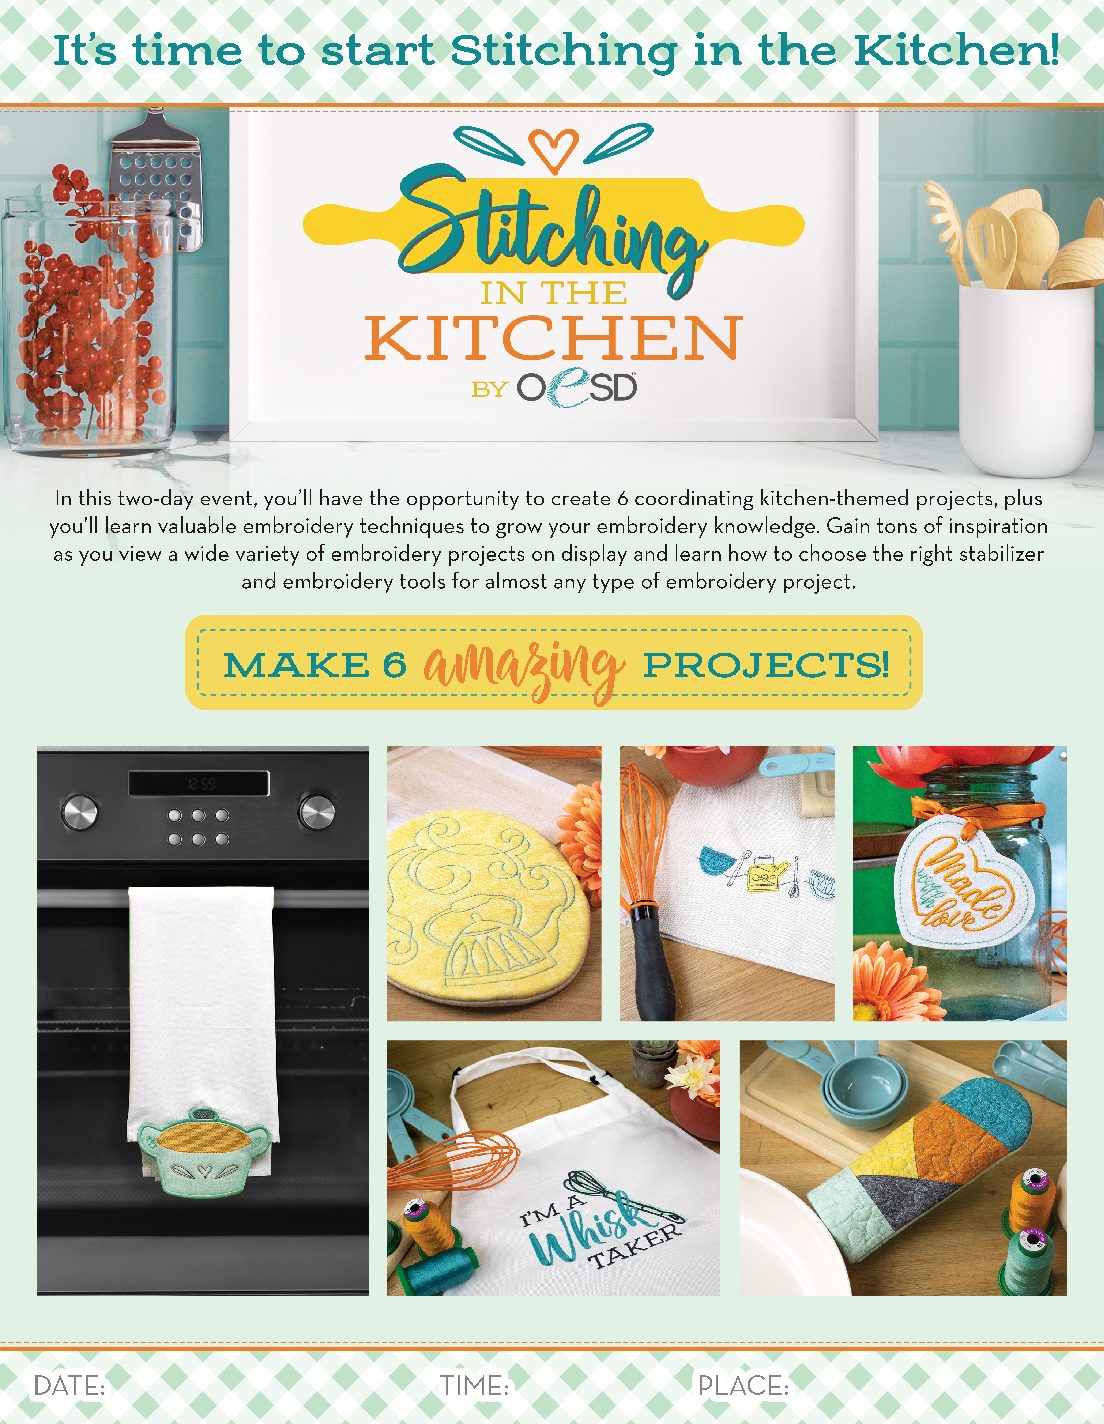 OESD Stitching in the Kitchen – 06/08/22 Event Center